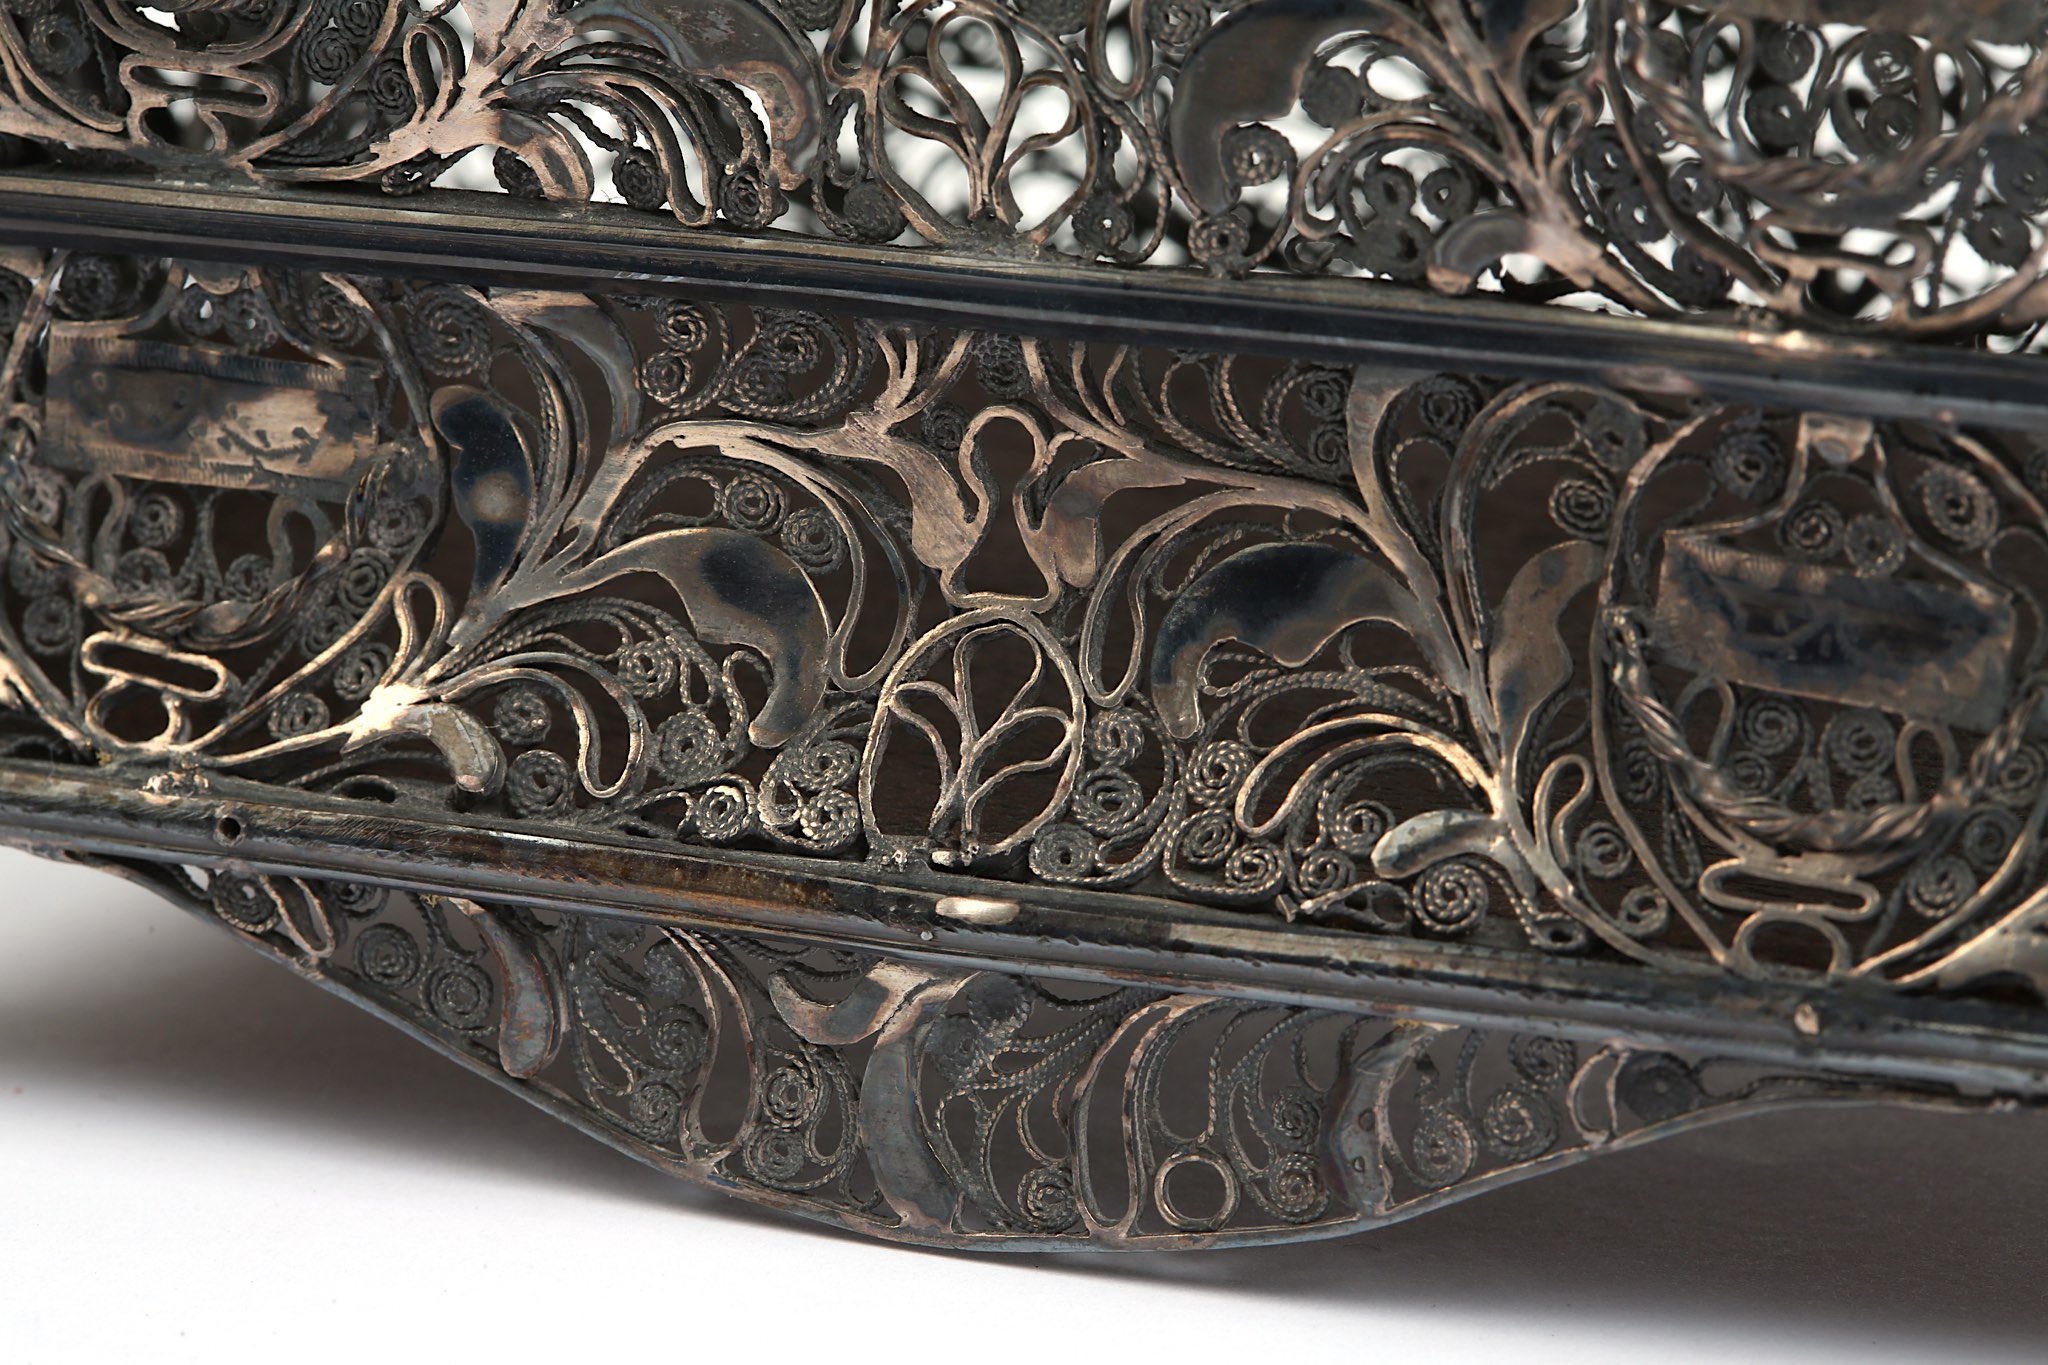 A LATE 18TH / 19TH CENTURY INDO-PORTUGUESE SILVER FILIGREE CASKET PROBABLY GOA modelled as a bombe - Image 5 of 8